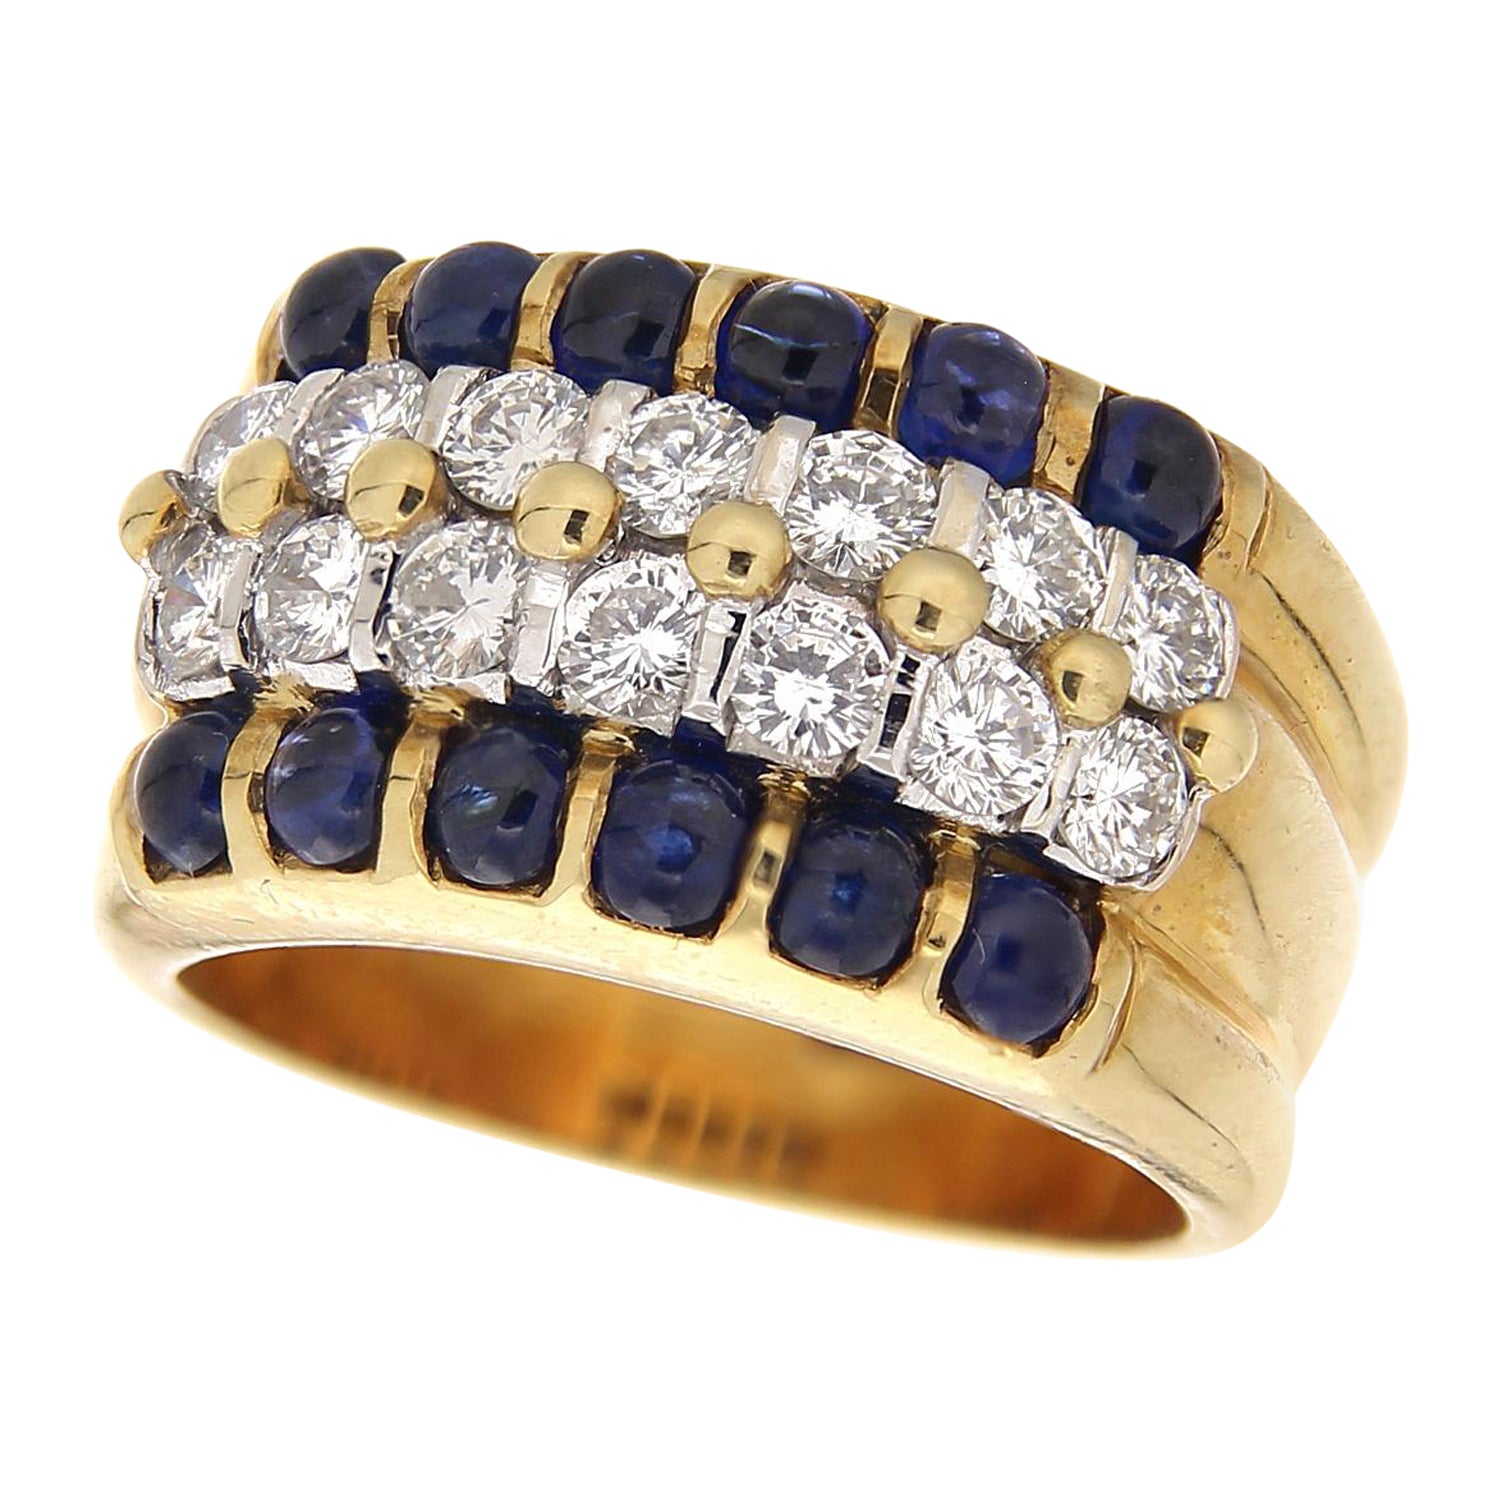 18Kt Yellow Gold Ring White Diamonds 1.10 ct & Cabochon-Cut Blue Sapphires 2.04 For Sale